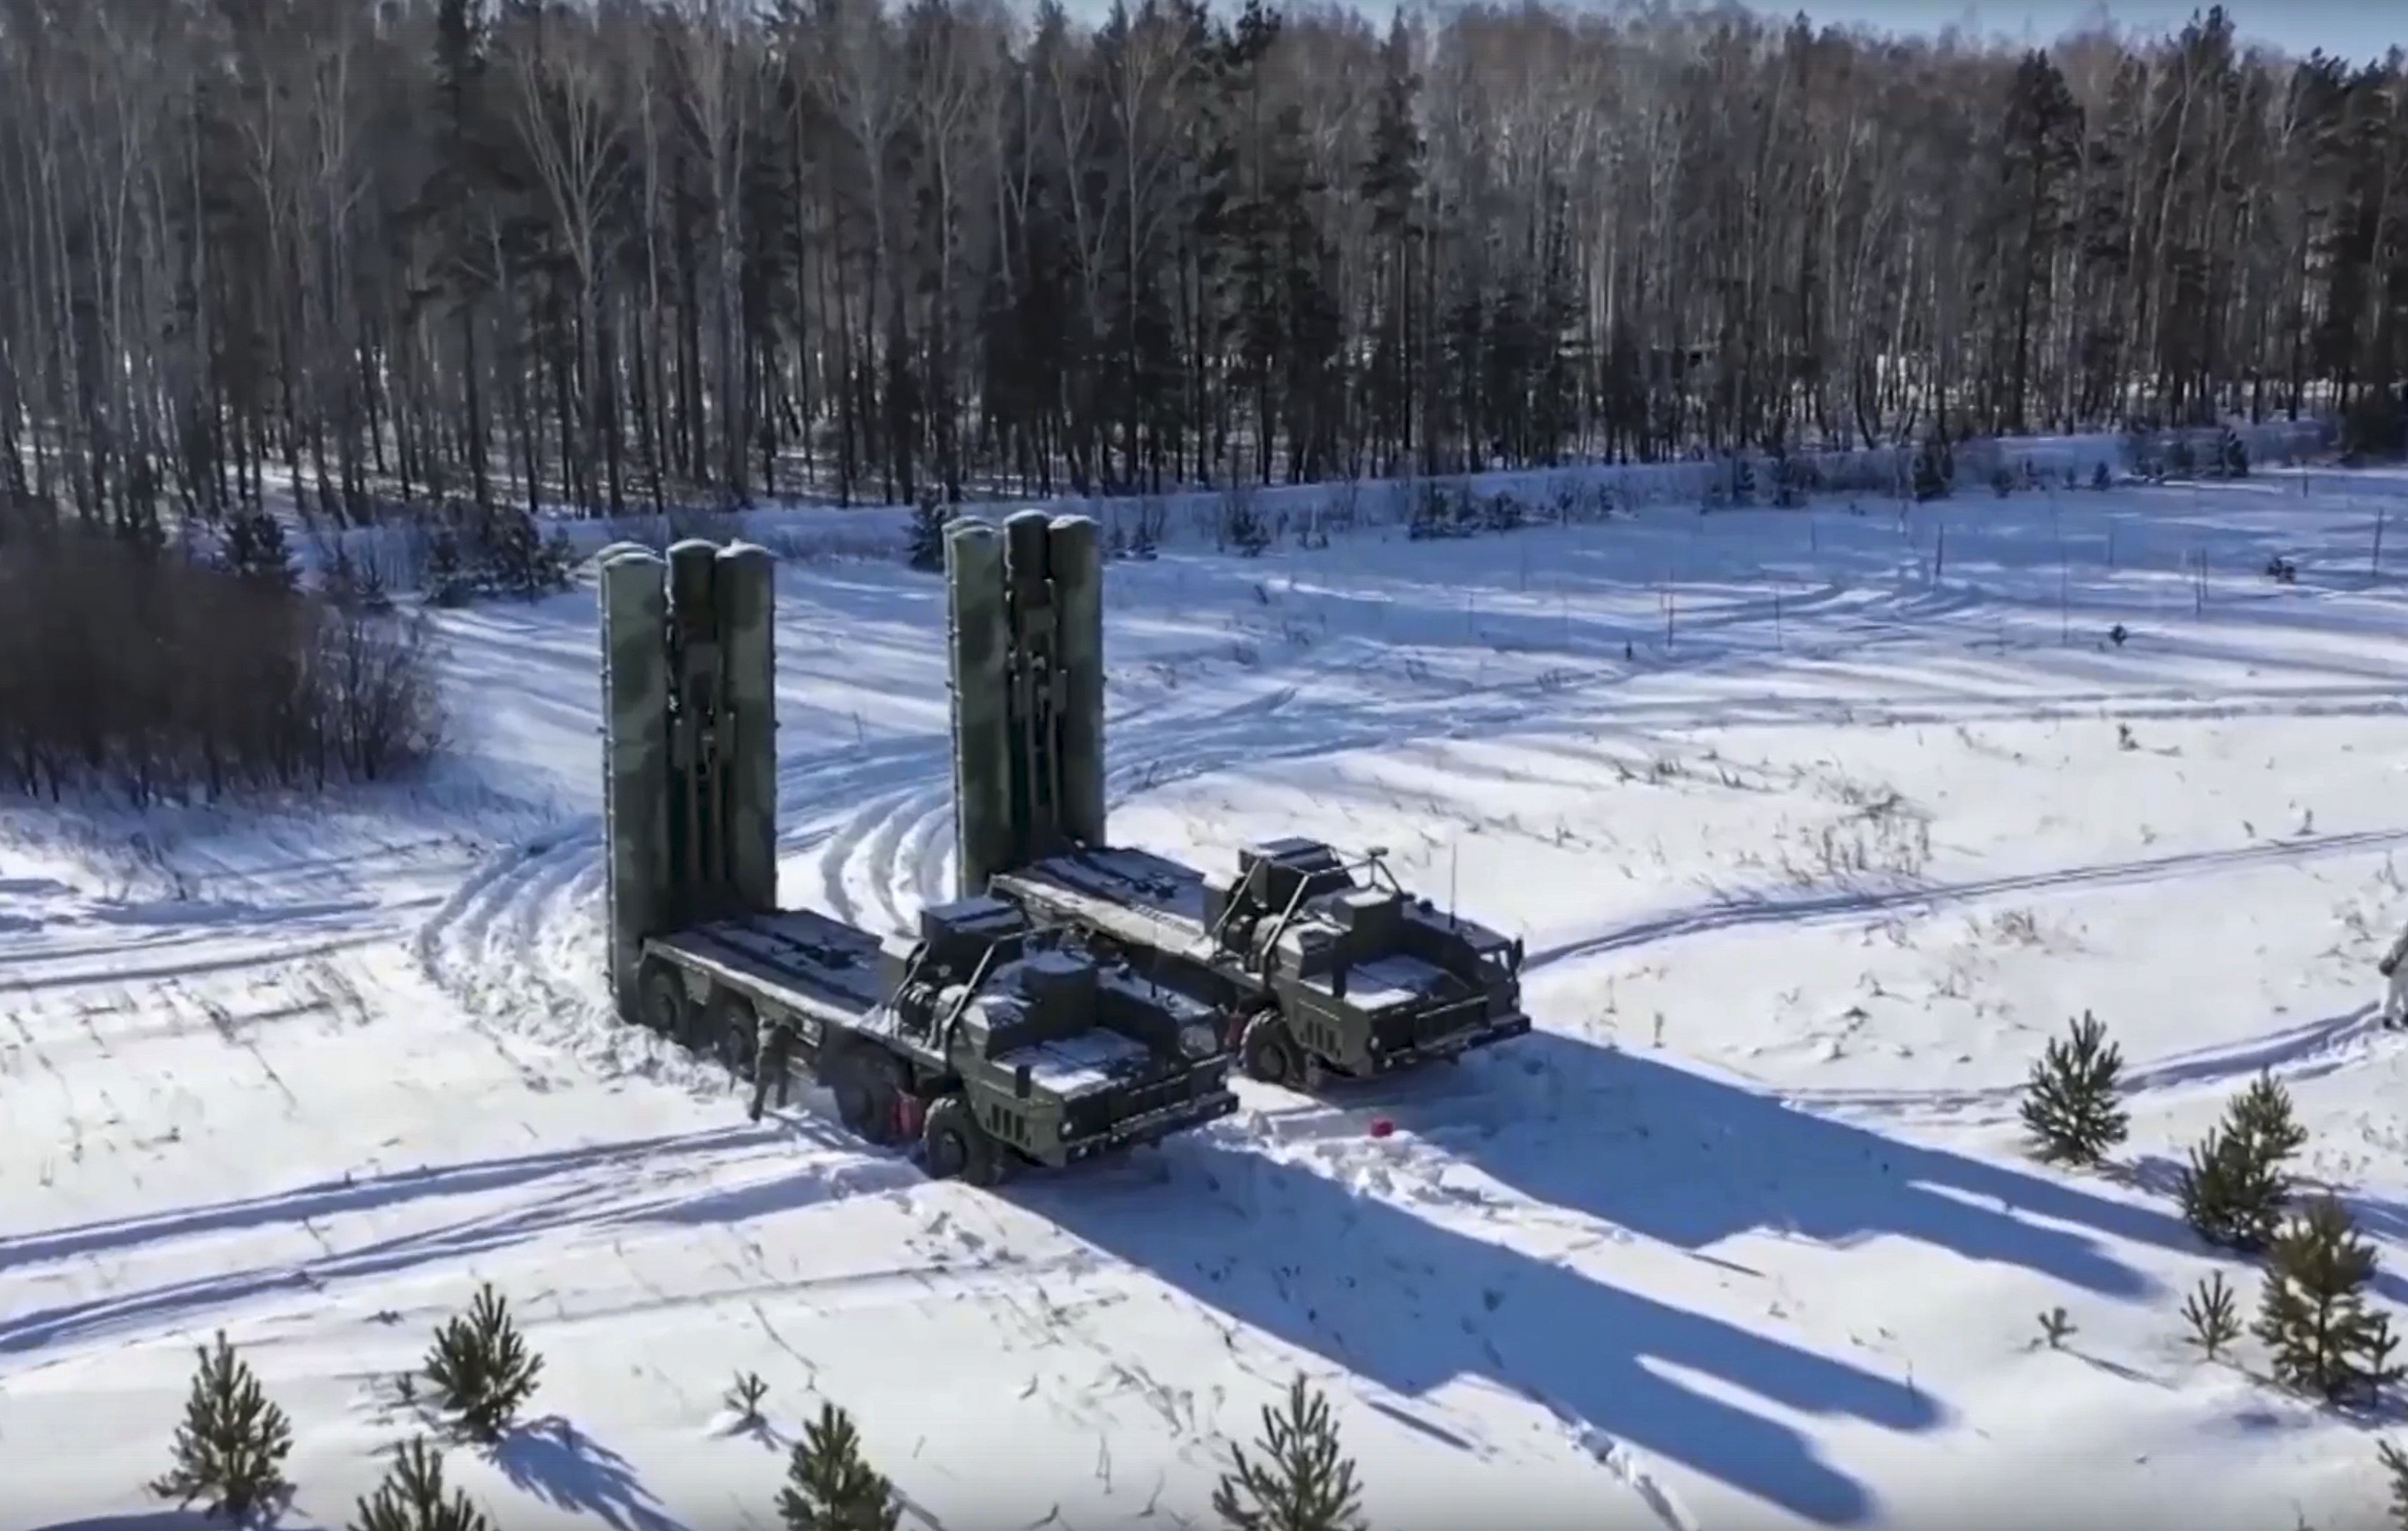 epa09714558 A handout still image taken from handout video made available by the Russian Defence Ministry press service shows Russian S-400 mobile long-range surface-to-air missile (LR-SAM) systems developed by Almaz-Antey, train for the protection of airspace in the Sverdlovsk region, Russia, 28 January 2022. About 3,000 servicemen of the Guards Red Banner Combined Arms Army of the Western Military District (ZVO) have begun combat training at training grounds in the Moscow, Rostov, Krasnodar, Yaroslav, Voronezh, Belgorod, Bryansk and Smolensk regions. In December 2021, the Russian Foreign Ministry published draft agreements between the Russian Federation and NATO and the United States on security guarantees. The document says that the United States should not create military bases in the territories of the former Soviet Union countries that are not members of NATO. The Russian Foreign Ministry on 26 January 2022 received a response from the United States and NATO on security guarantees.  EPA/RUSSIAN DEFENCE MINISTRY PRESS SERVICE/HANDOUT  HANDOUT EDITORIAL USE ONLY/NO SALES